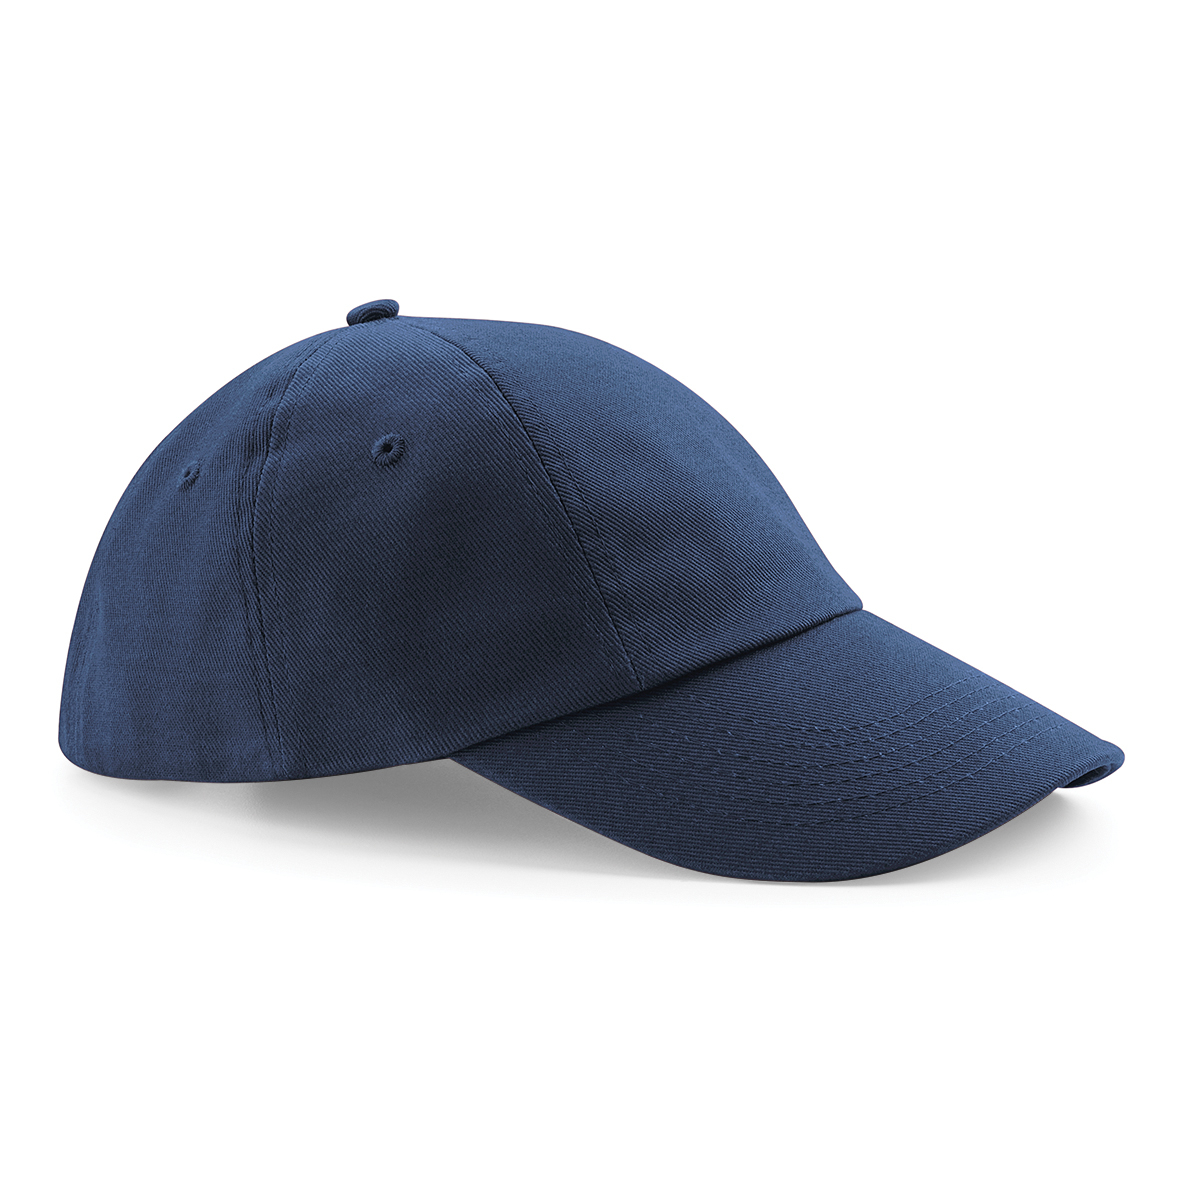 Low Profile Cap in navy with seamless, centralised front panel